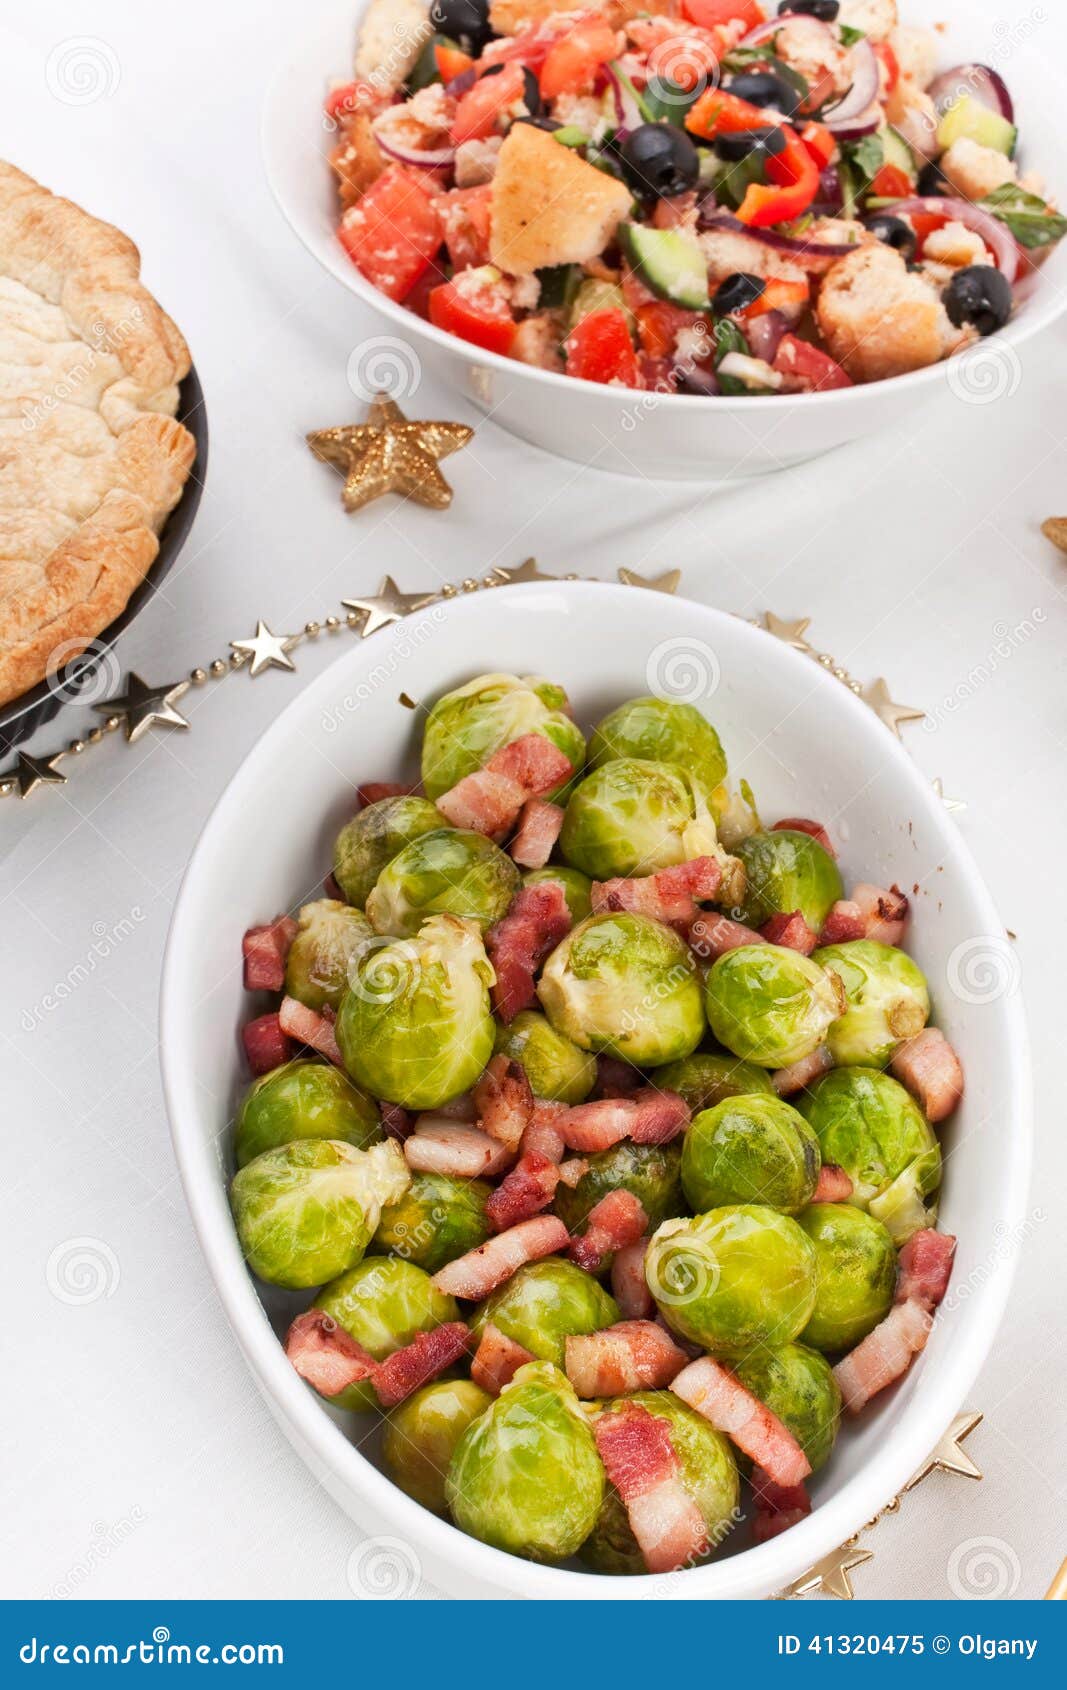 Traditional Christmas Brussels Sprouts Stock Image - Image of healthy ...